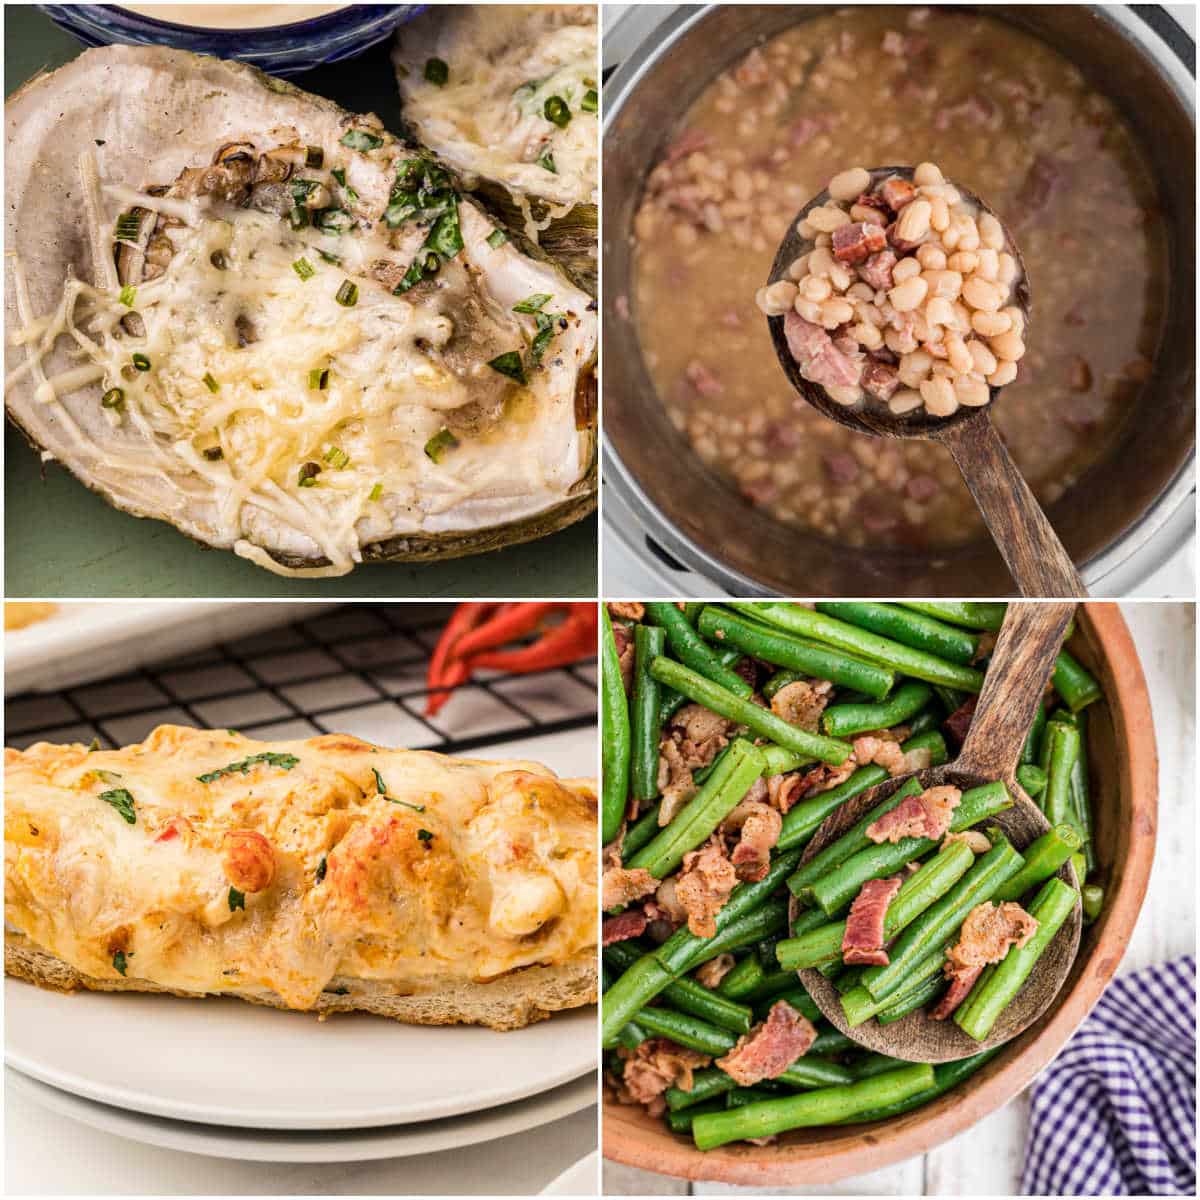 A collage of four images showing dishes that would be good to serve with Jambalaya.